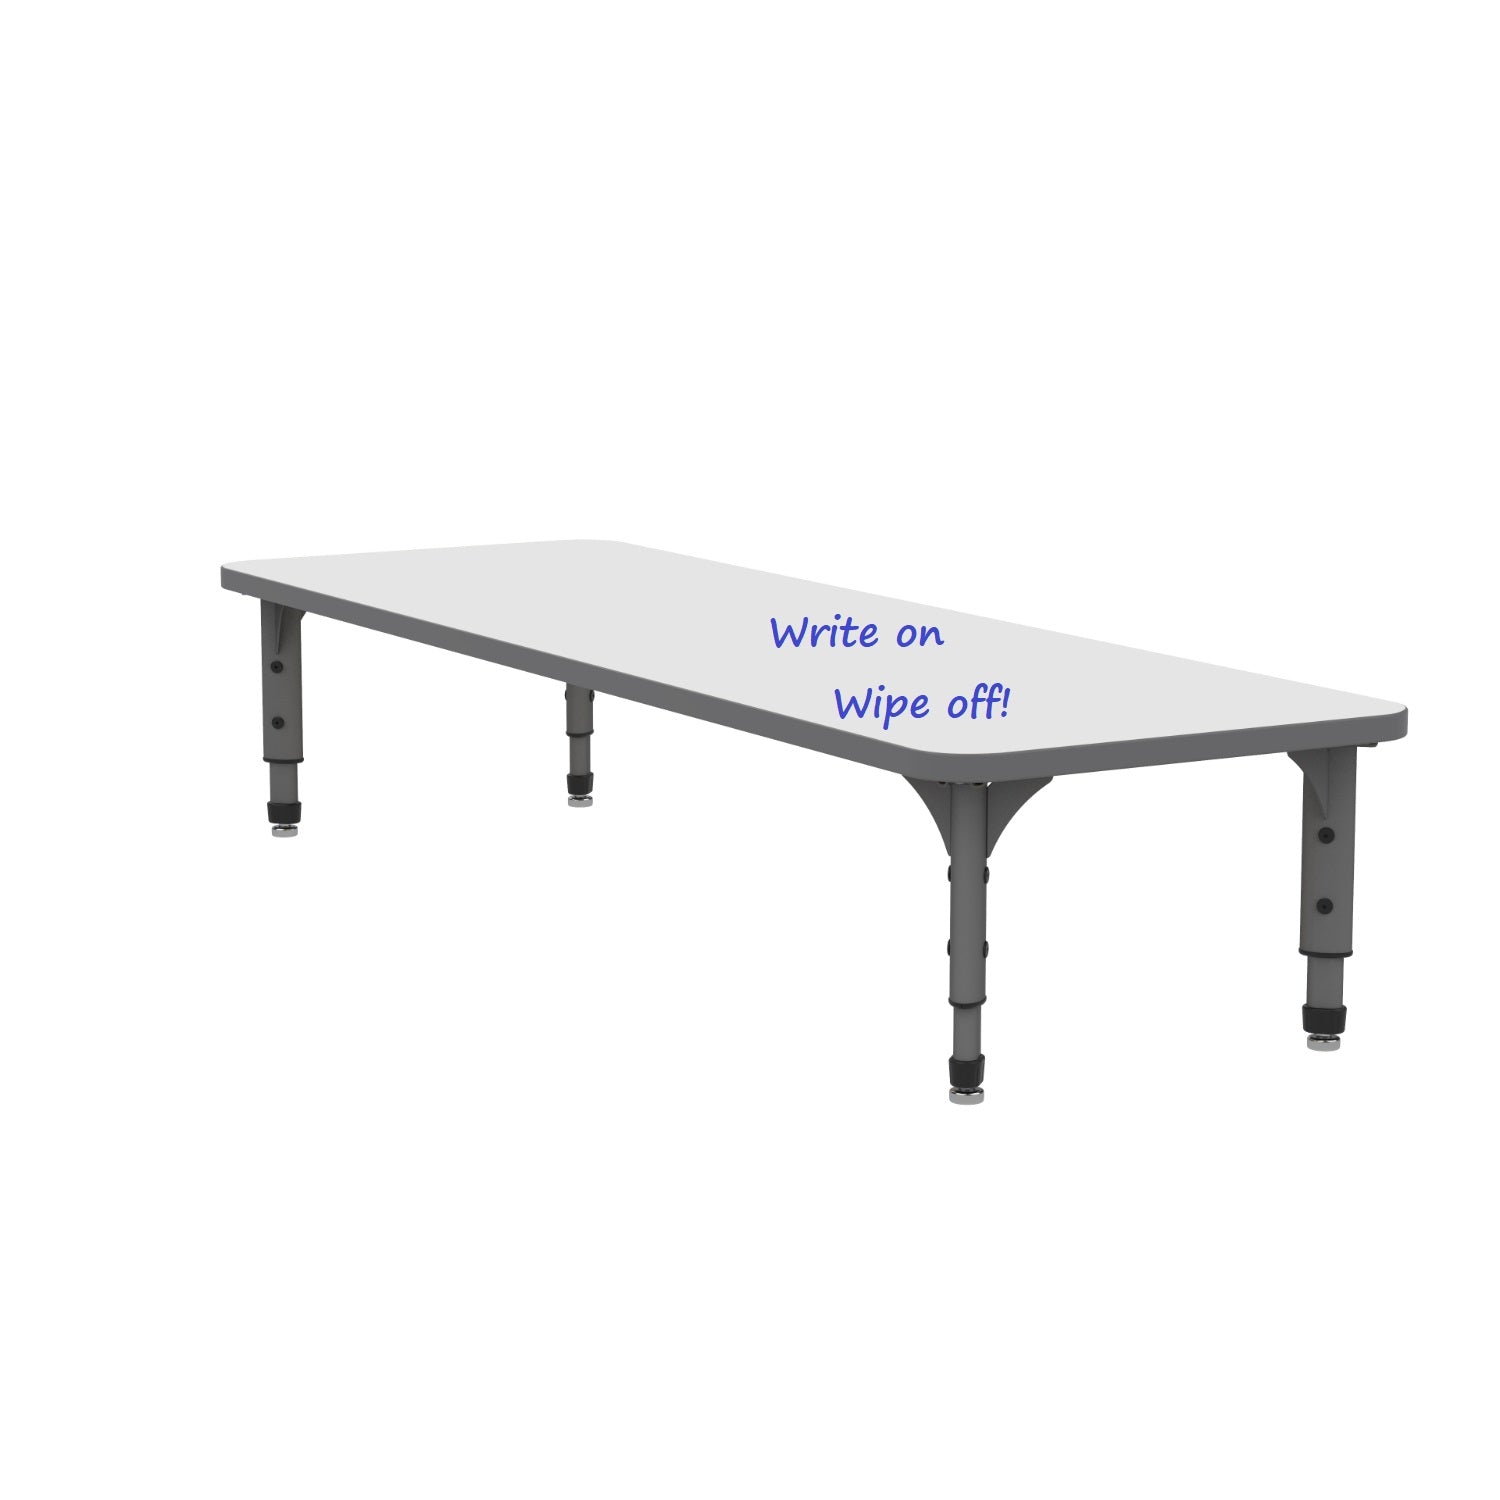 Adjustable Height Floor Activity Table with White Dry-Erase Markerboard Top, 24" x 72" Rectangle